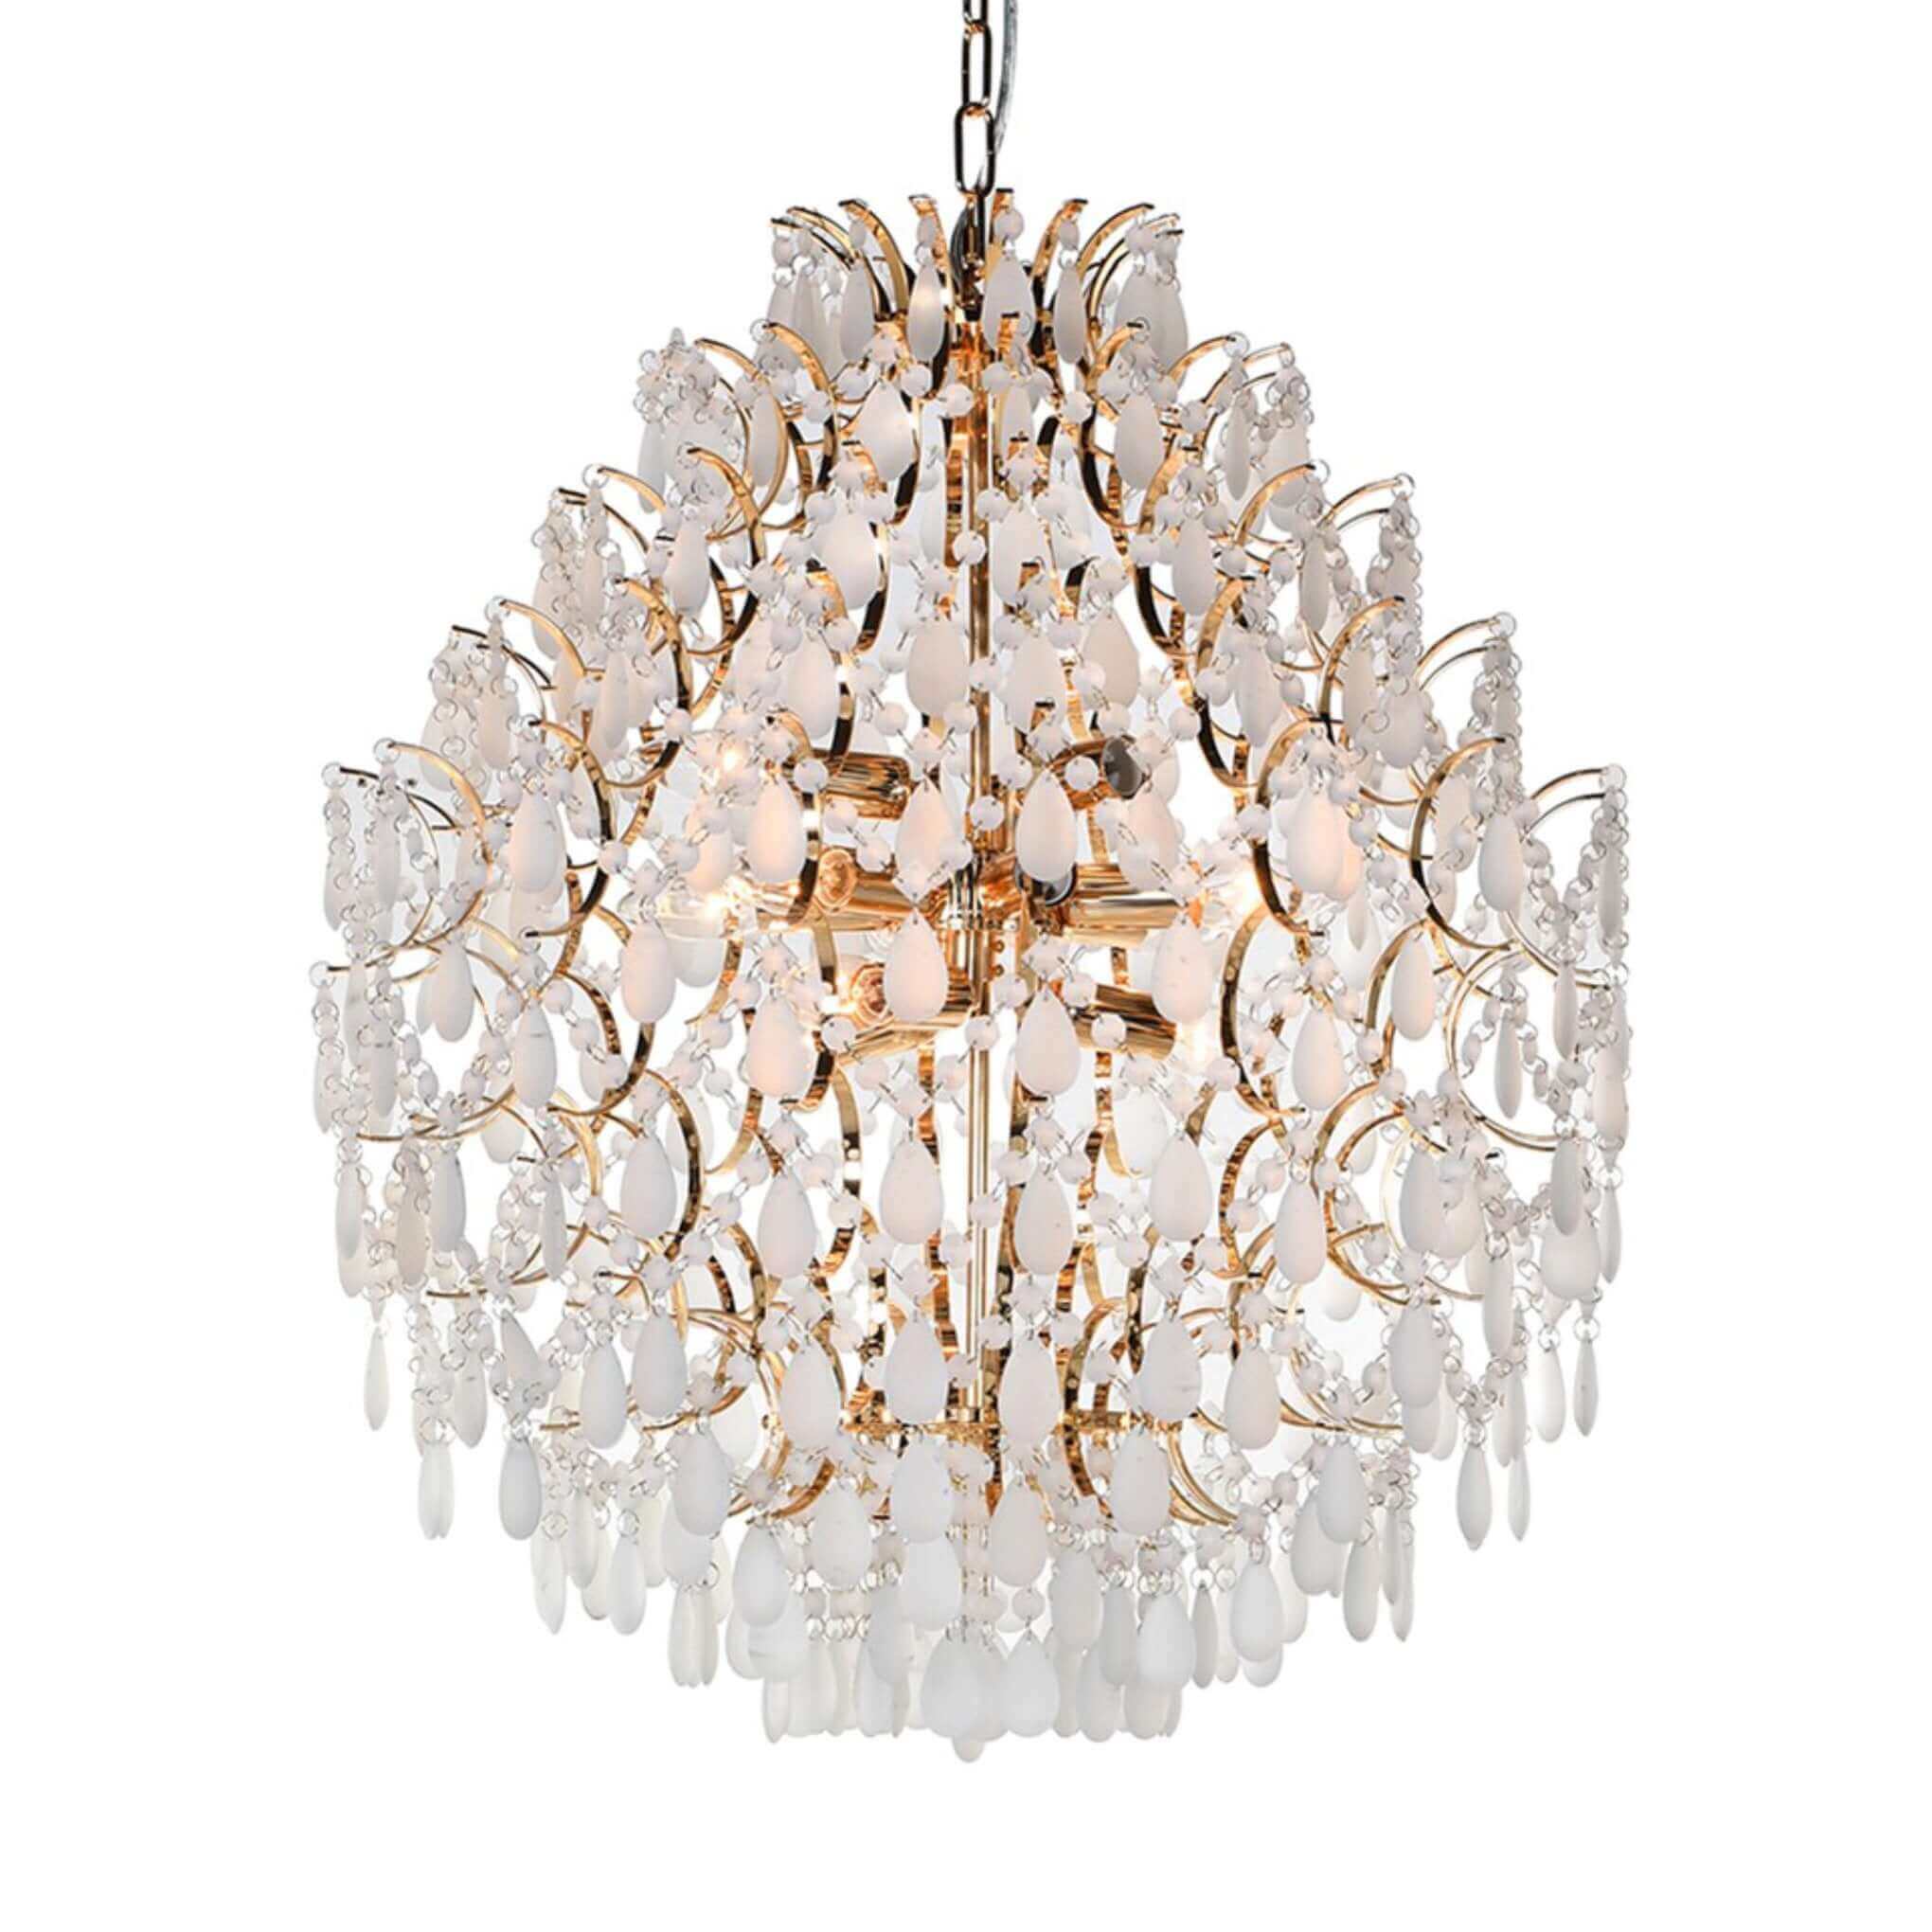 DeVere Frosted Glass Droplet Chandelier - 10 Light - escapologyhome.co.uk